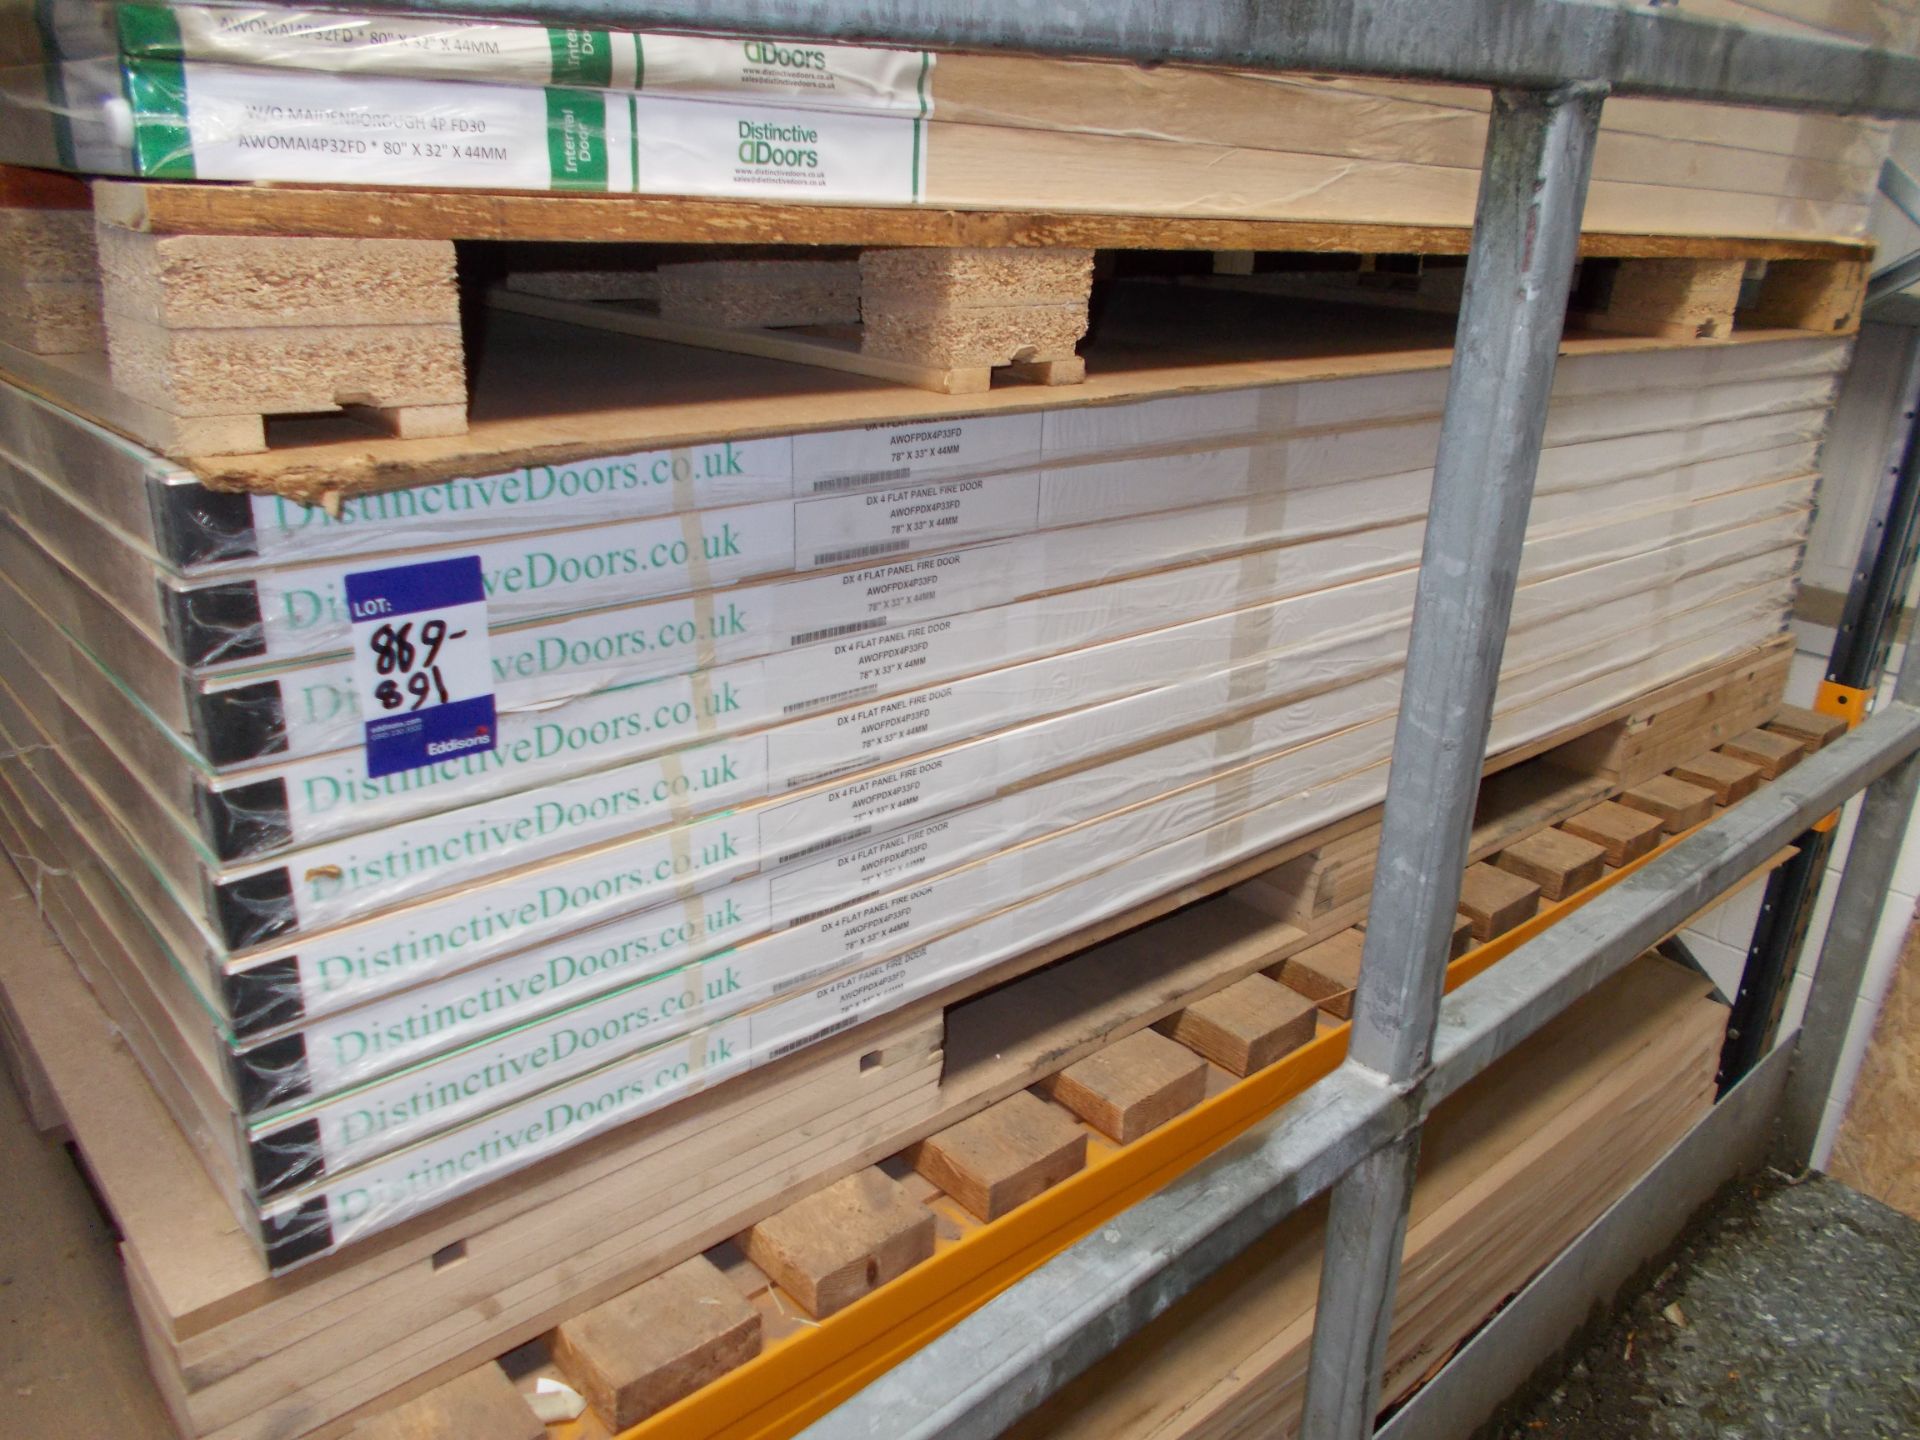 3 x DX 4 Flat Panel Fire Door AWOFPDX4P33FD 78”x33”x44mm - Lots to be handed out in order they are - Image 2 of 3